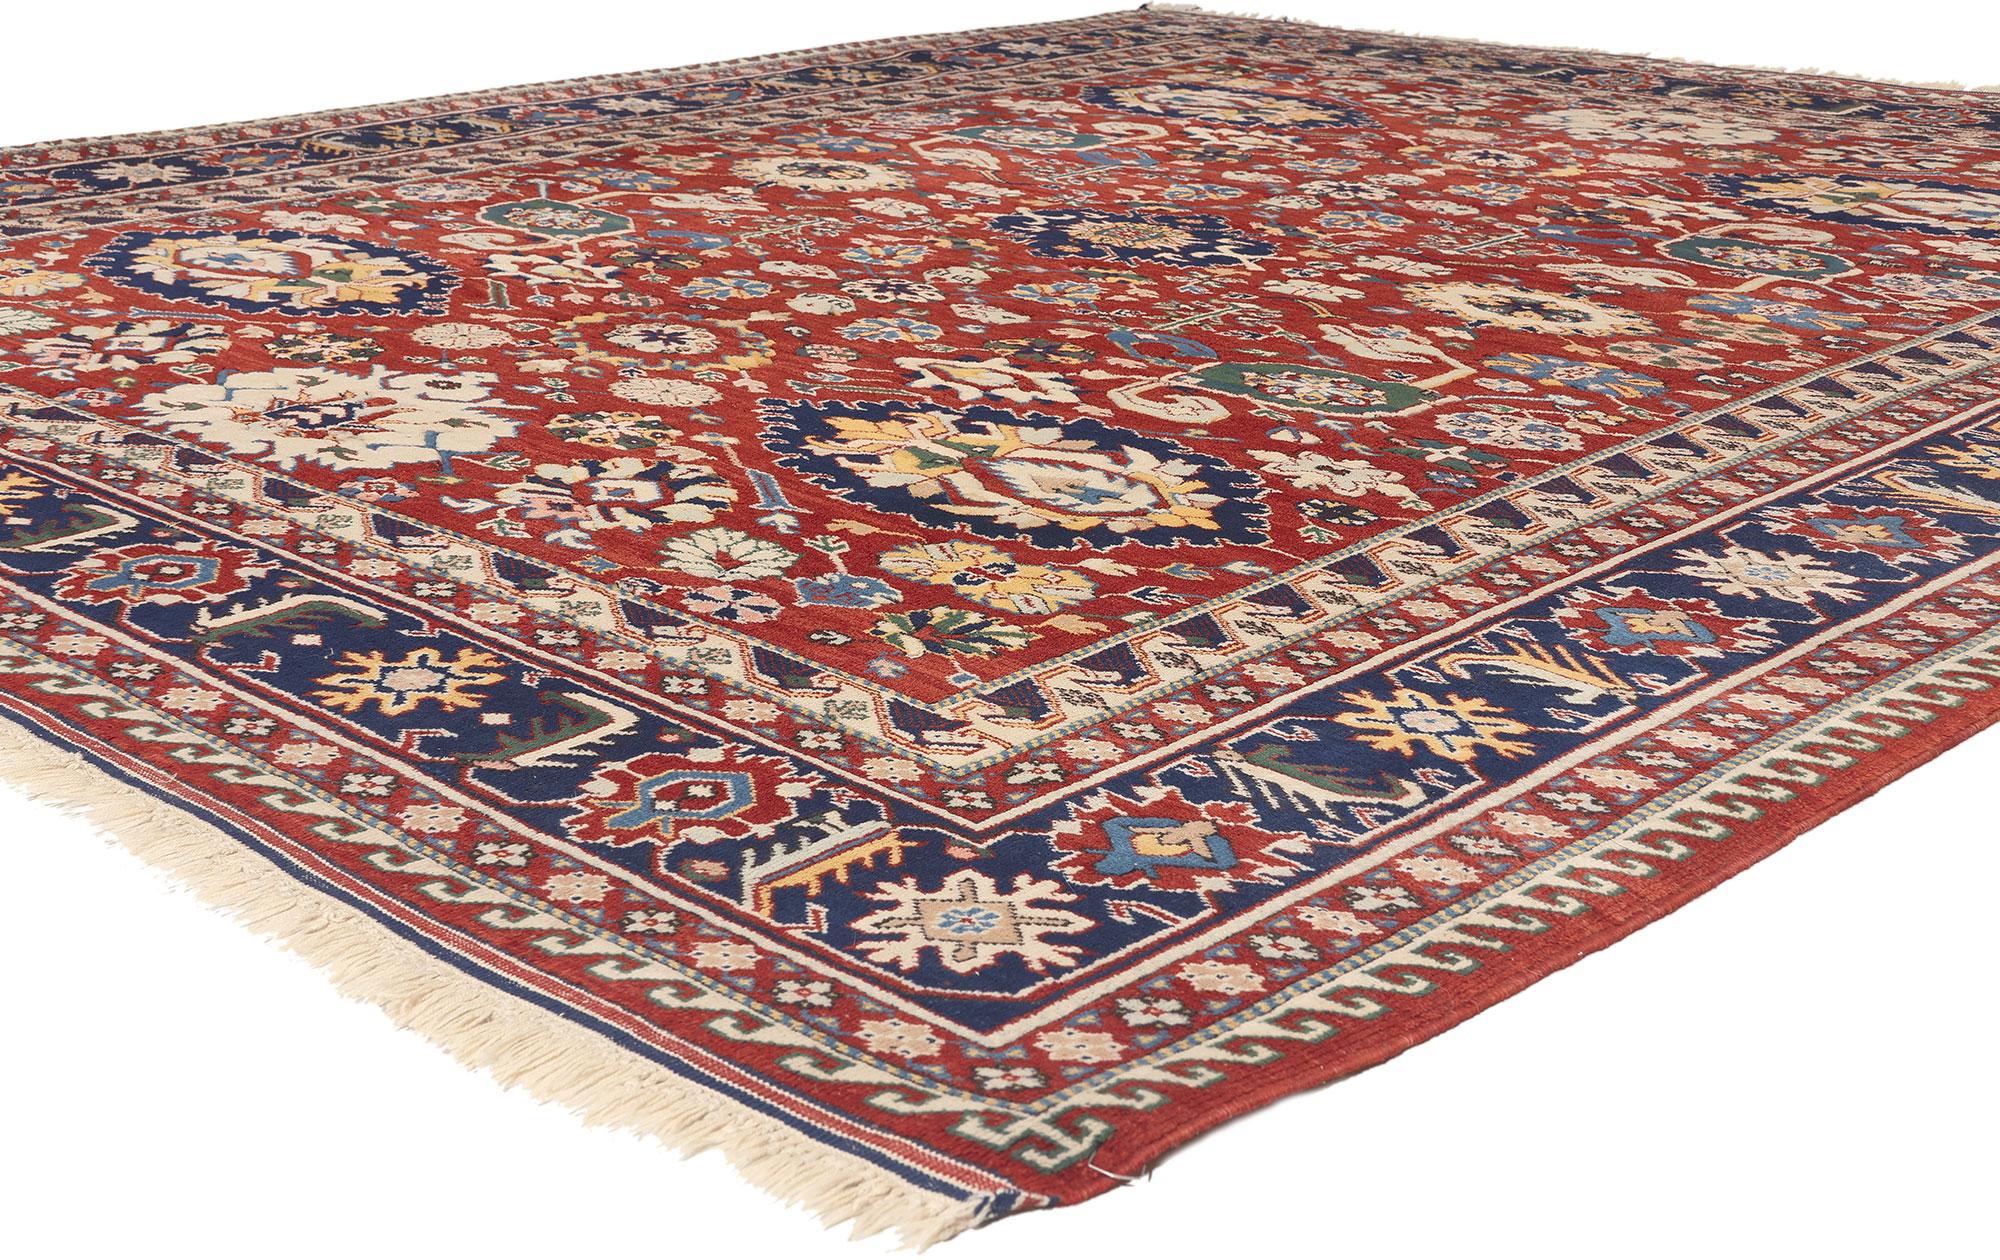 78646 Vintage Turkish Oushak Rug, 08'03 x 09'07.
Patriotic flair meets nomadic charm in this hand knotted wool vintage Turkish Oushak rug. The striking geometric design and sophisticated colors woven into this piece work together creating a relaxed